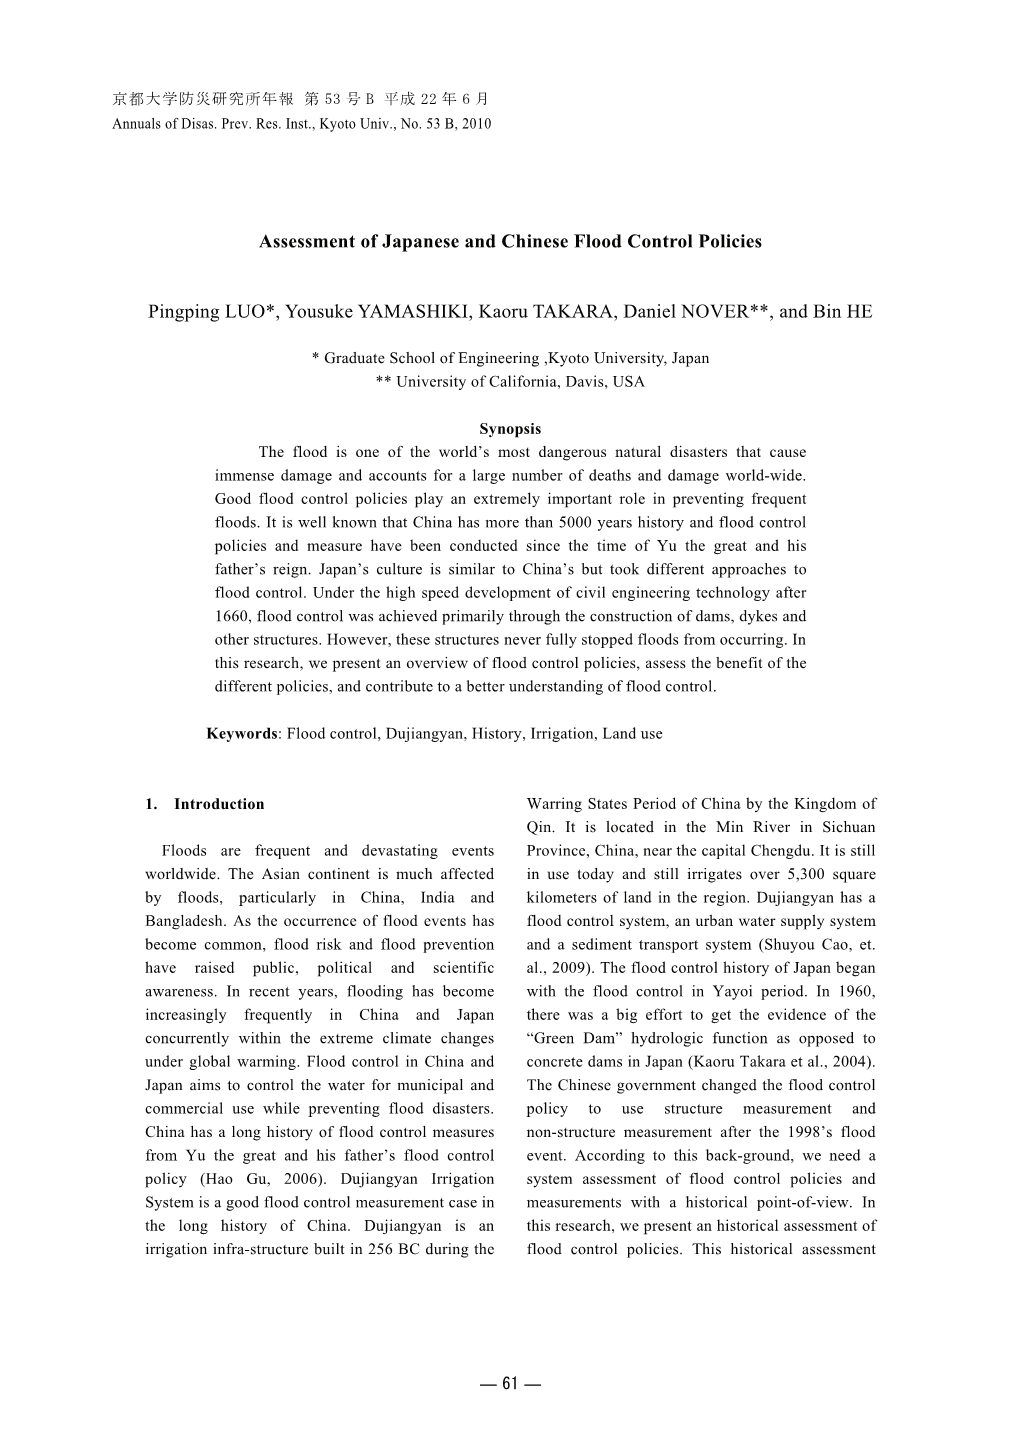 Assessment of Japanese and Chinese Flood Control Policies